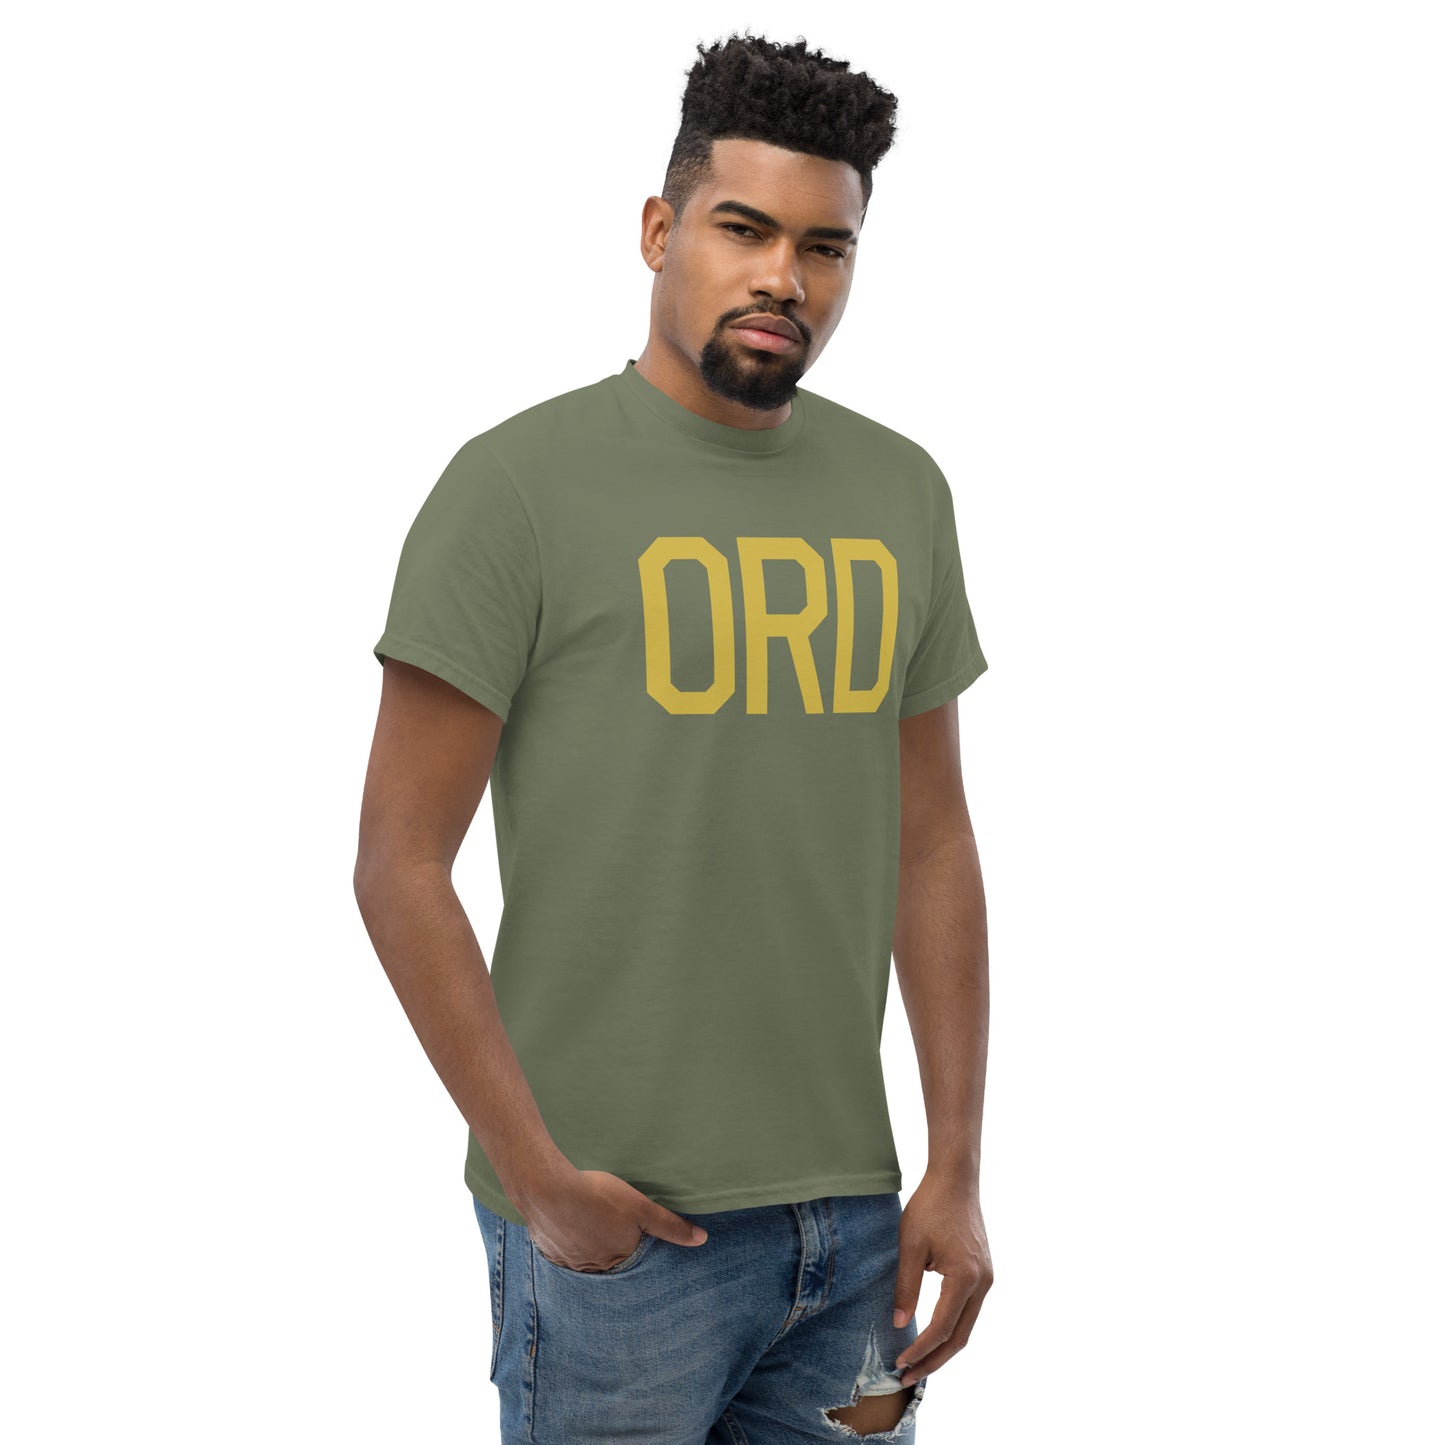 Aviation Enthusiast Men's Tee - Old Gold Graphic • ORD Chicago • YHM Designs - Image 08